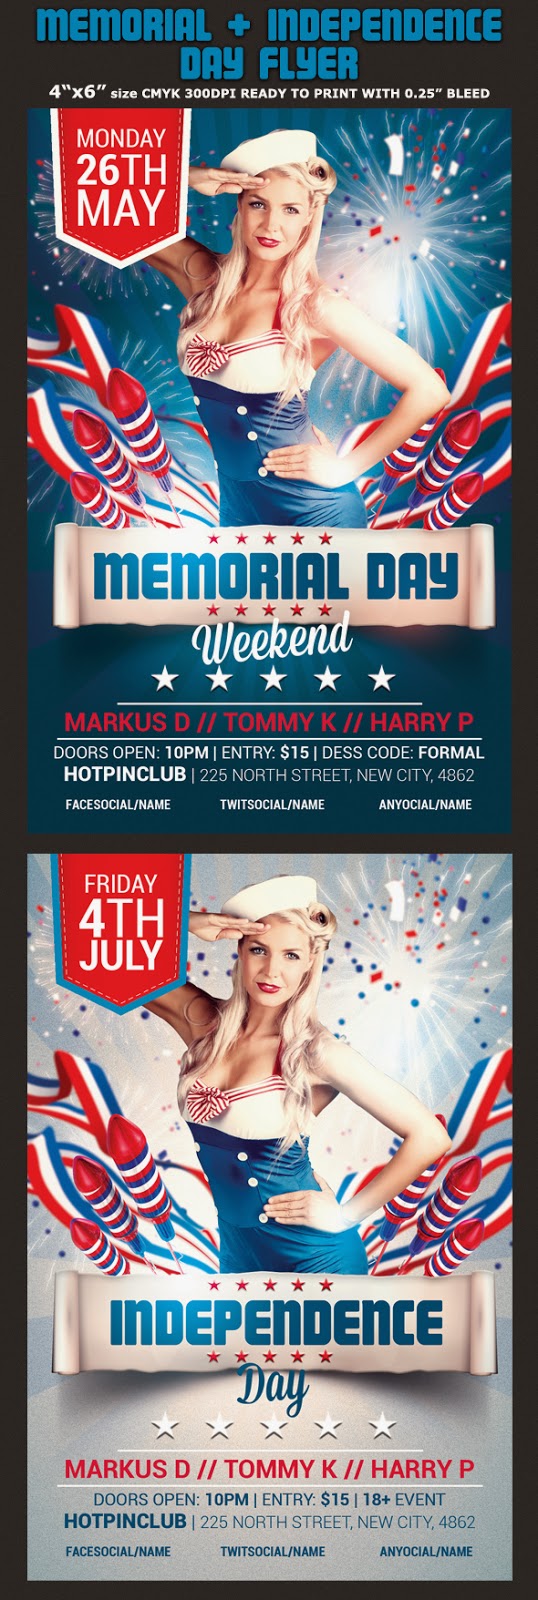  Memorial Independence Day Party Flyer Template